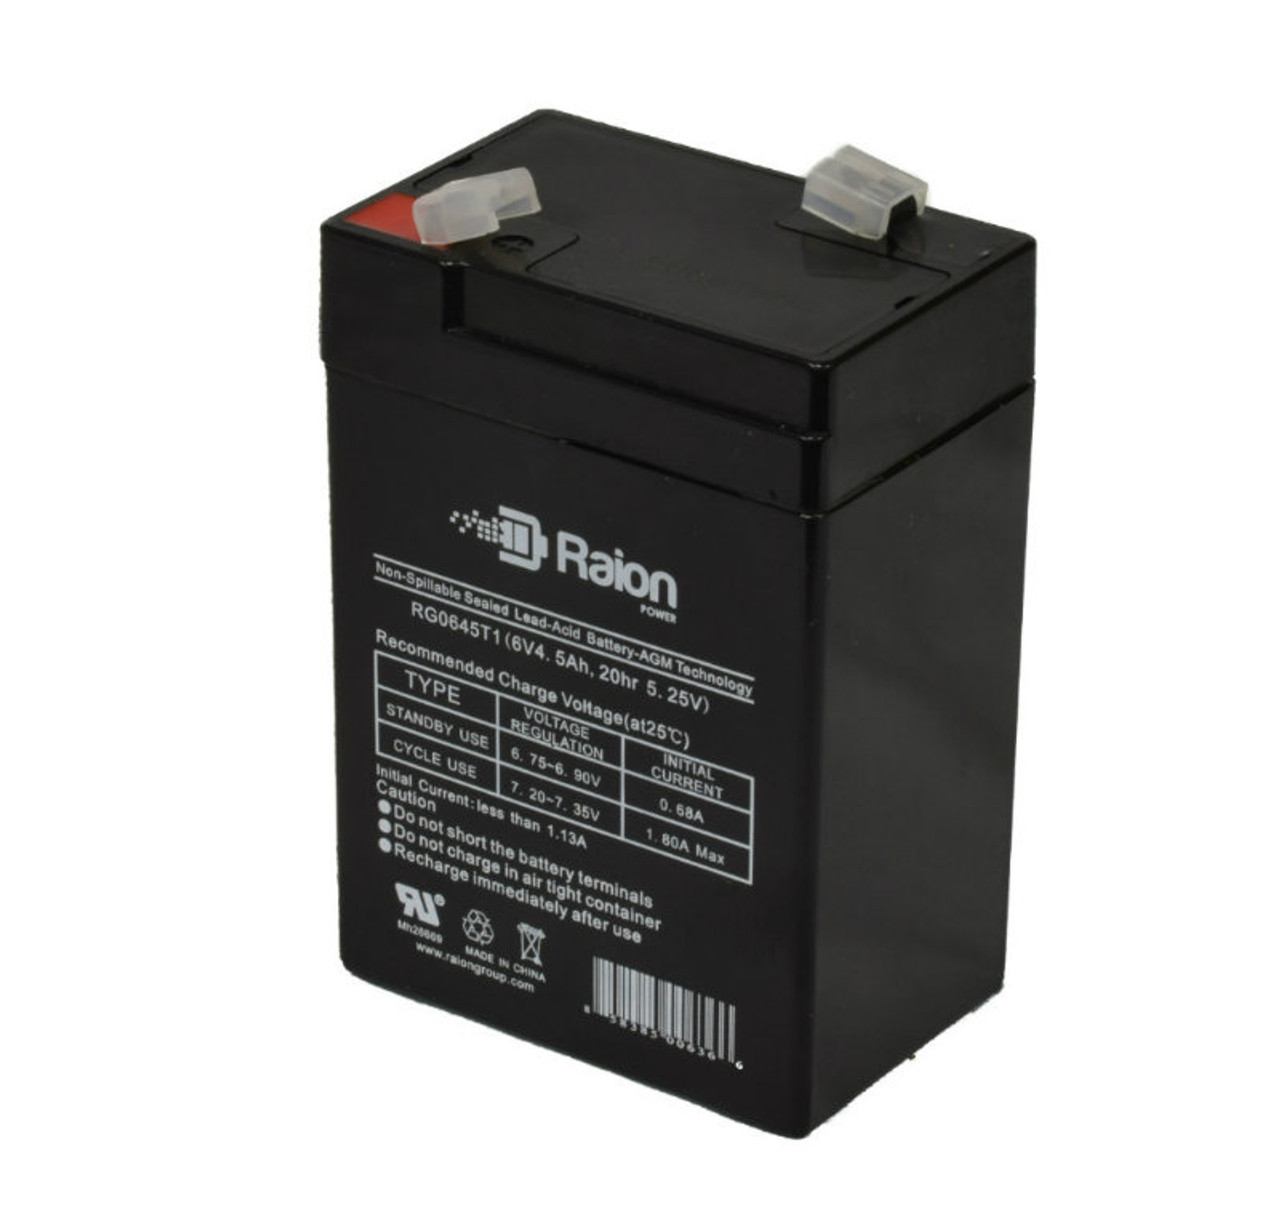 Raion Power RG0645T1 6V 4.5Ah Replacement Battery Cartridge for Lithonia LLBE2